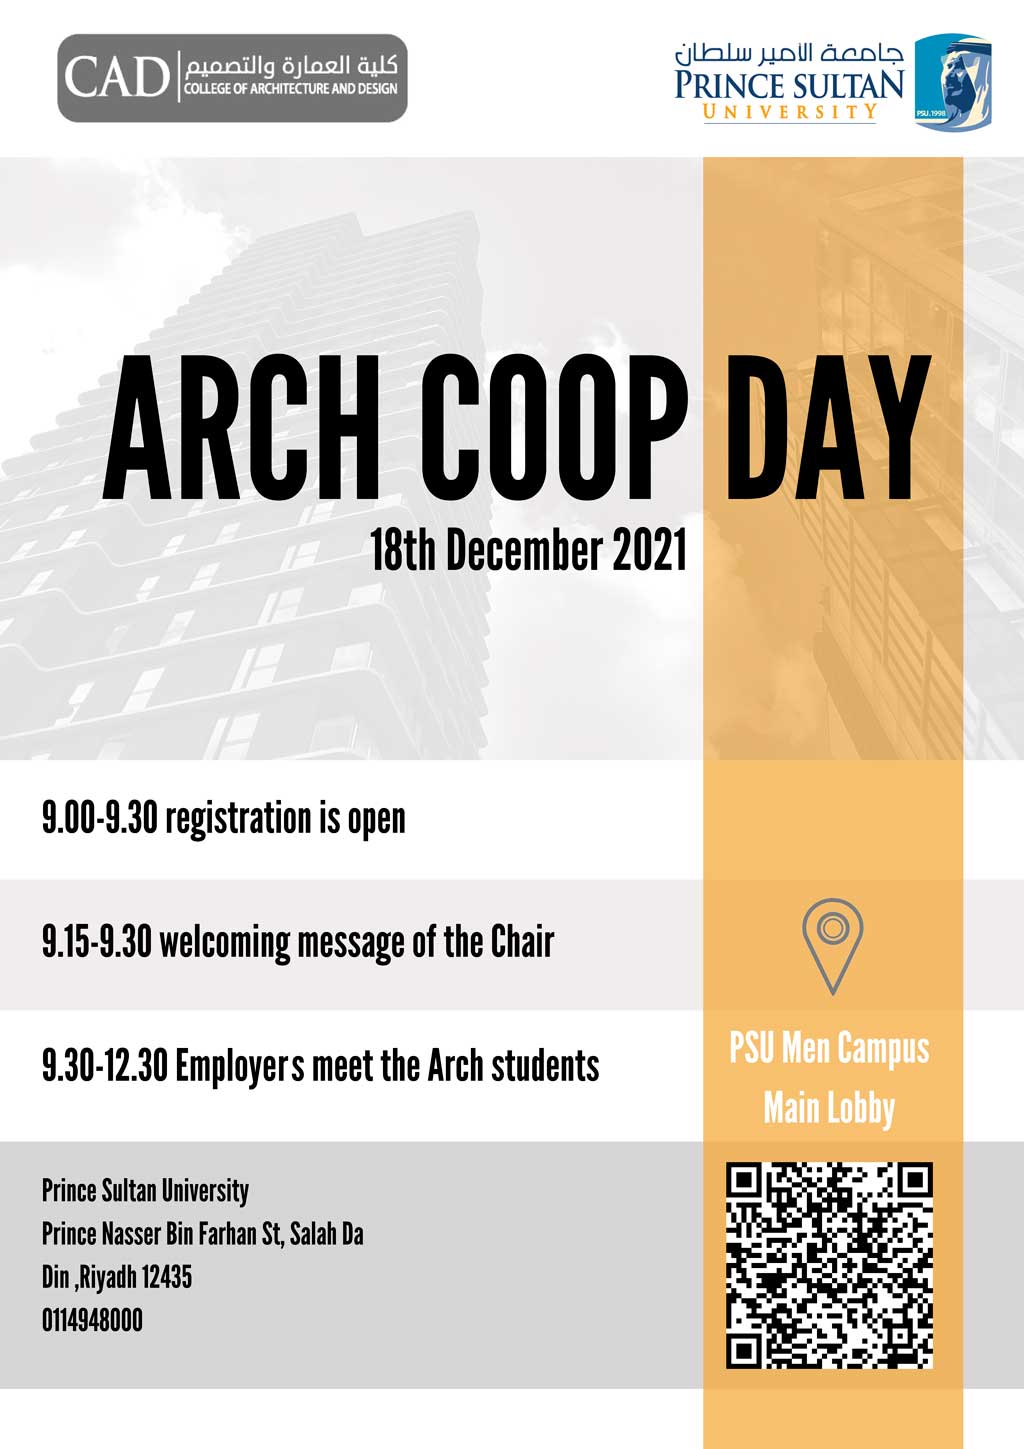 ARCH COOP DAY